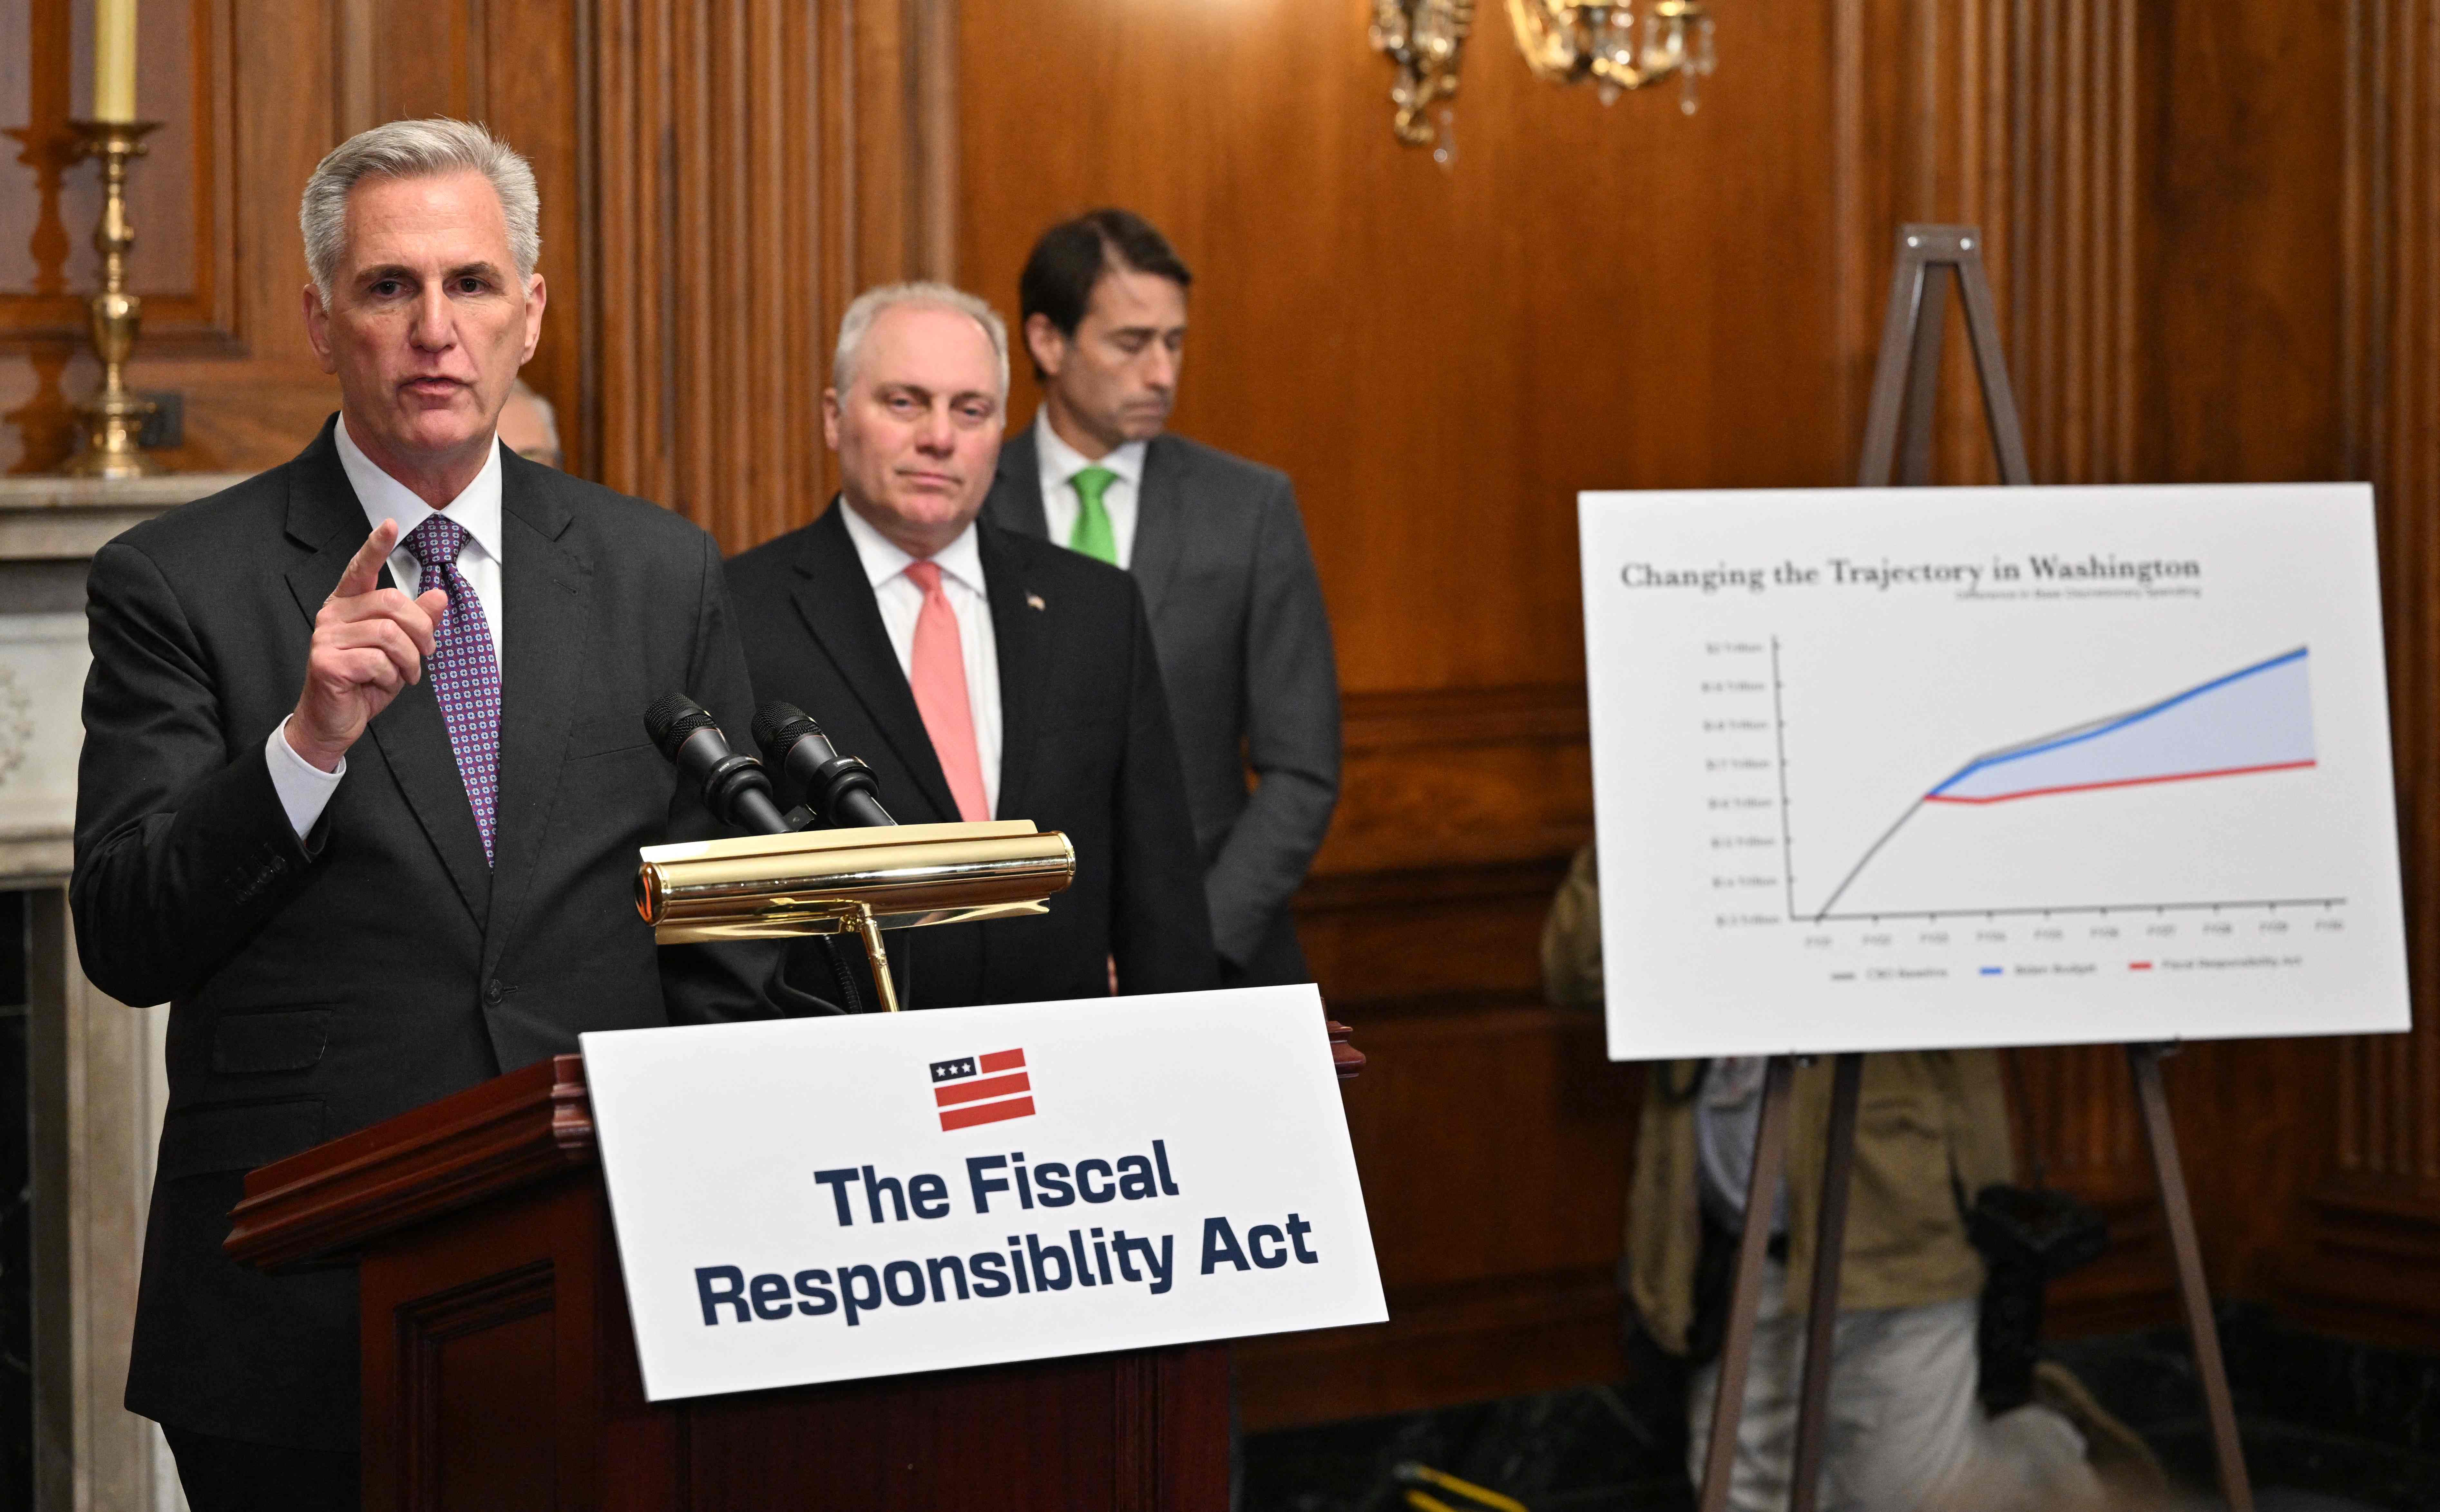 Debt ceiling deal passes House and heads to Senate, hurricane season begins: 5 Things podcast